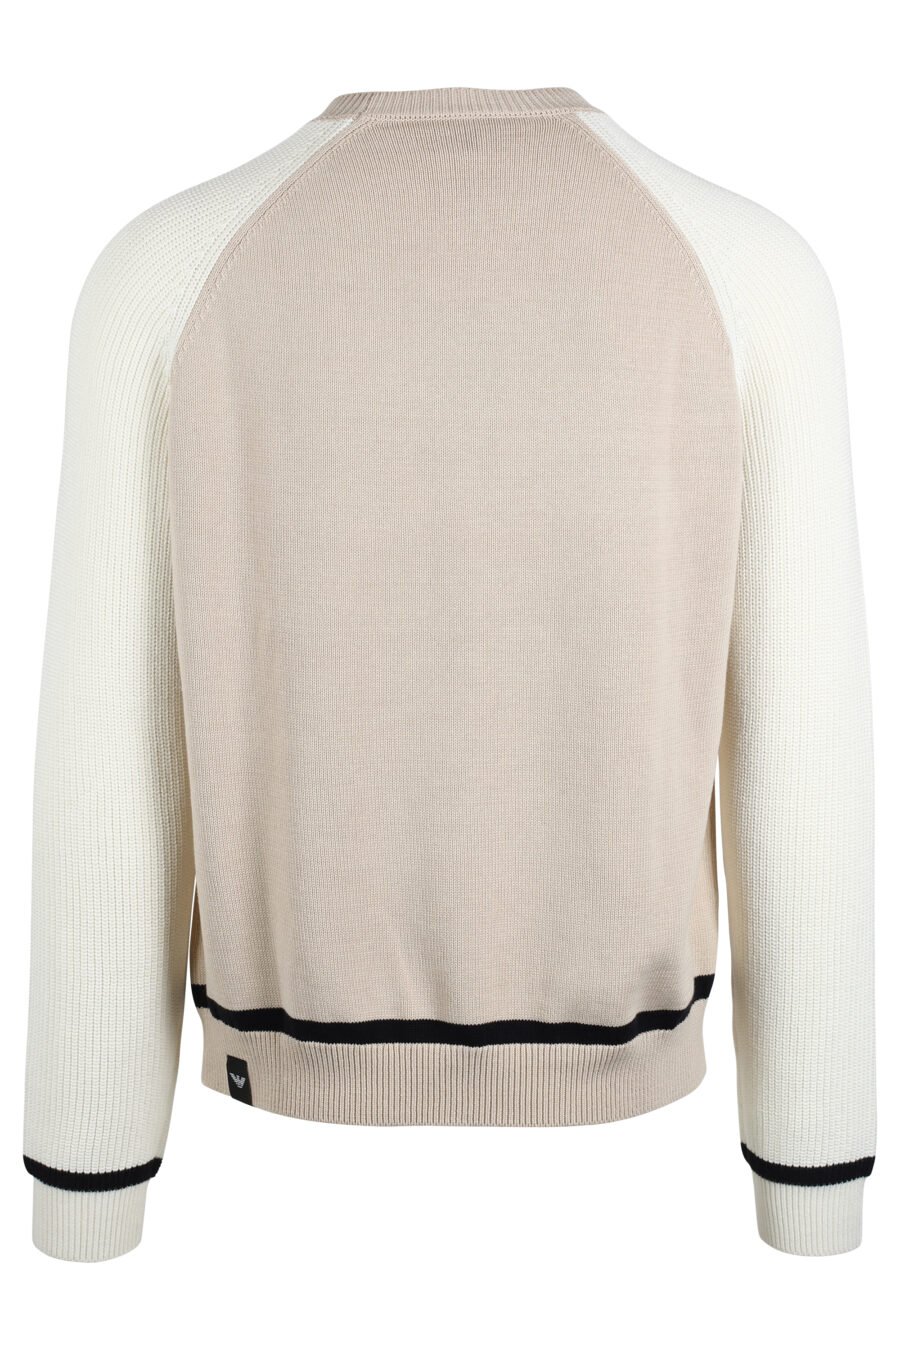 Beige knitted jumper with mini-logo - IMG 4755